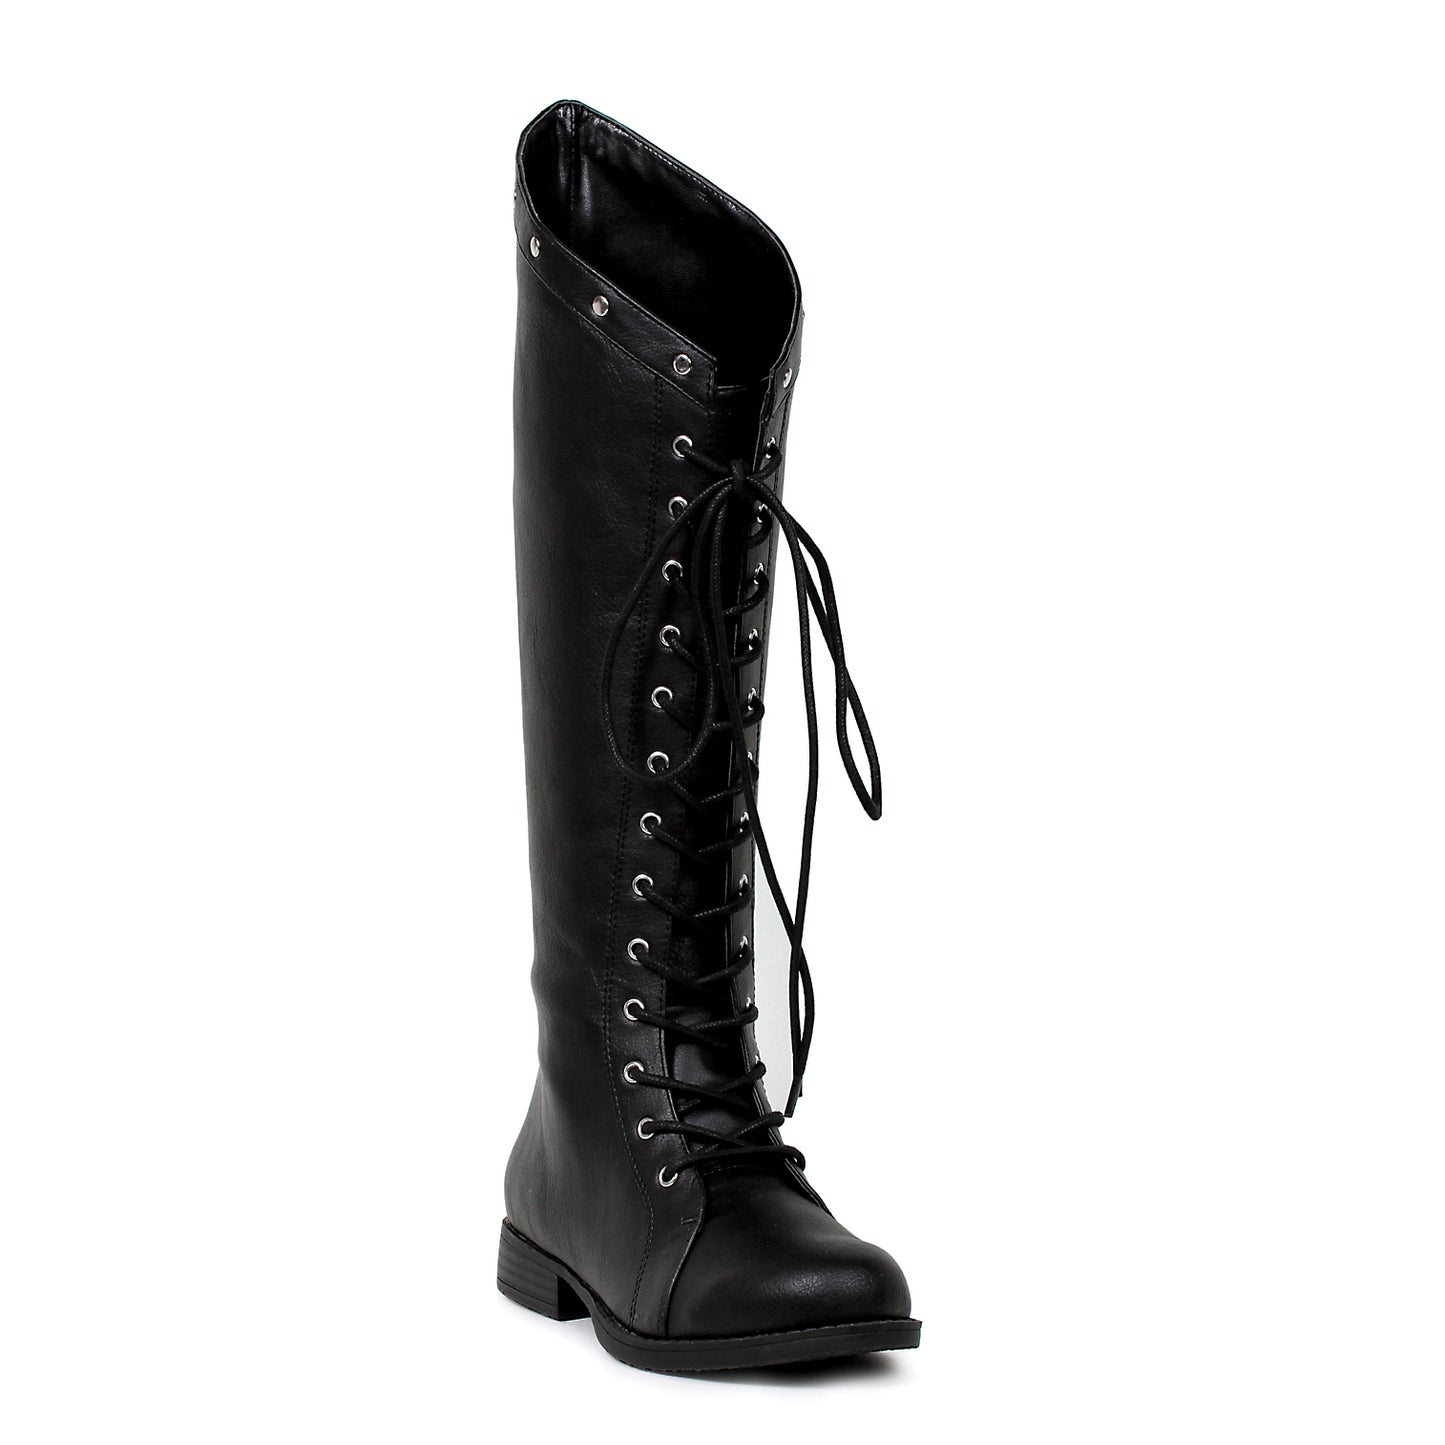 181-HUNTRESS Ellie Shoes 1" Inch Womens Knee High Boot KNEE HIGH